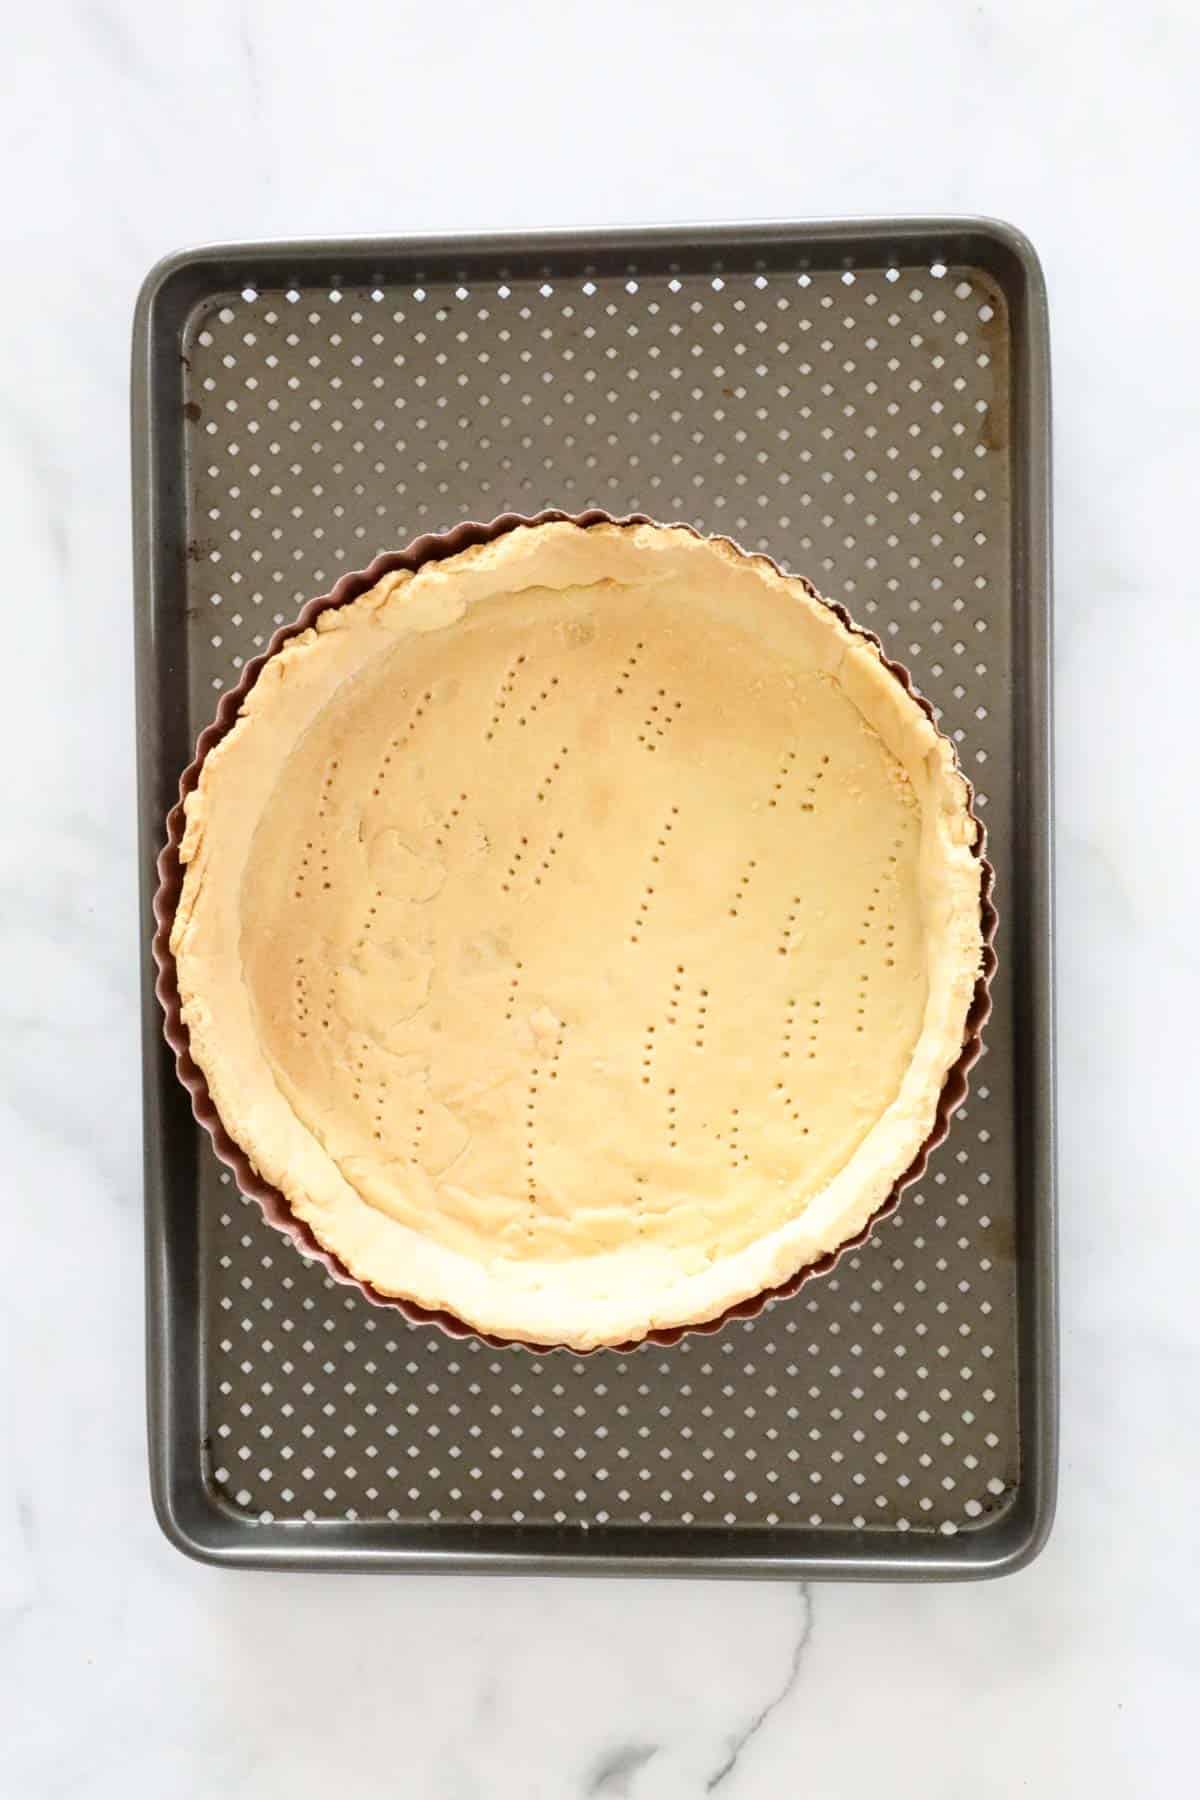 A pastry shell that has been blind baked, in a tart tin.